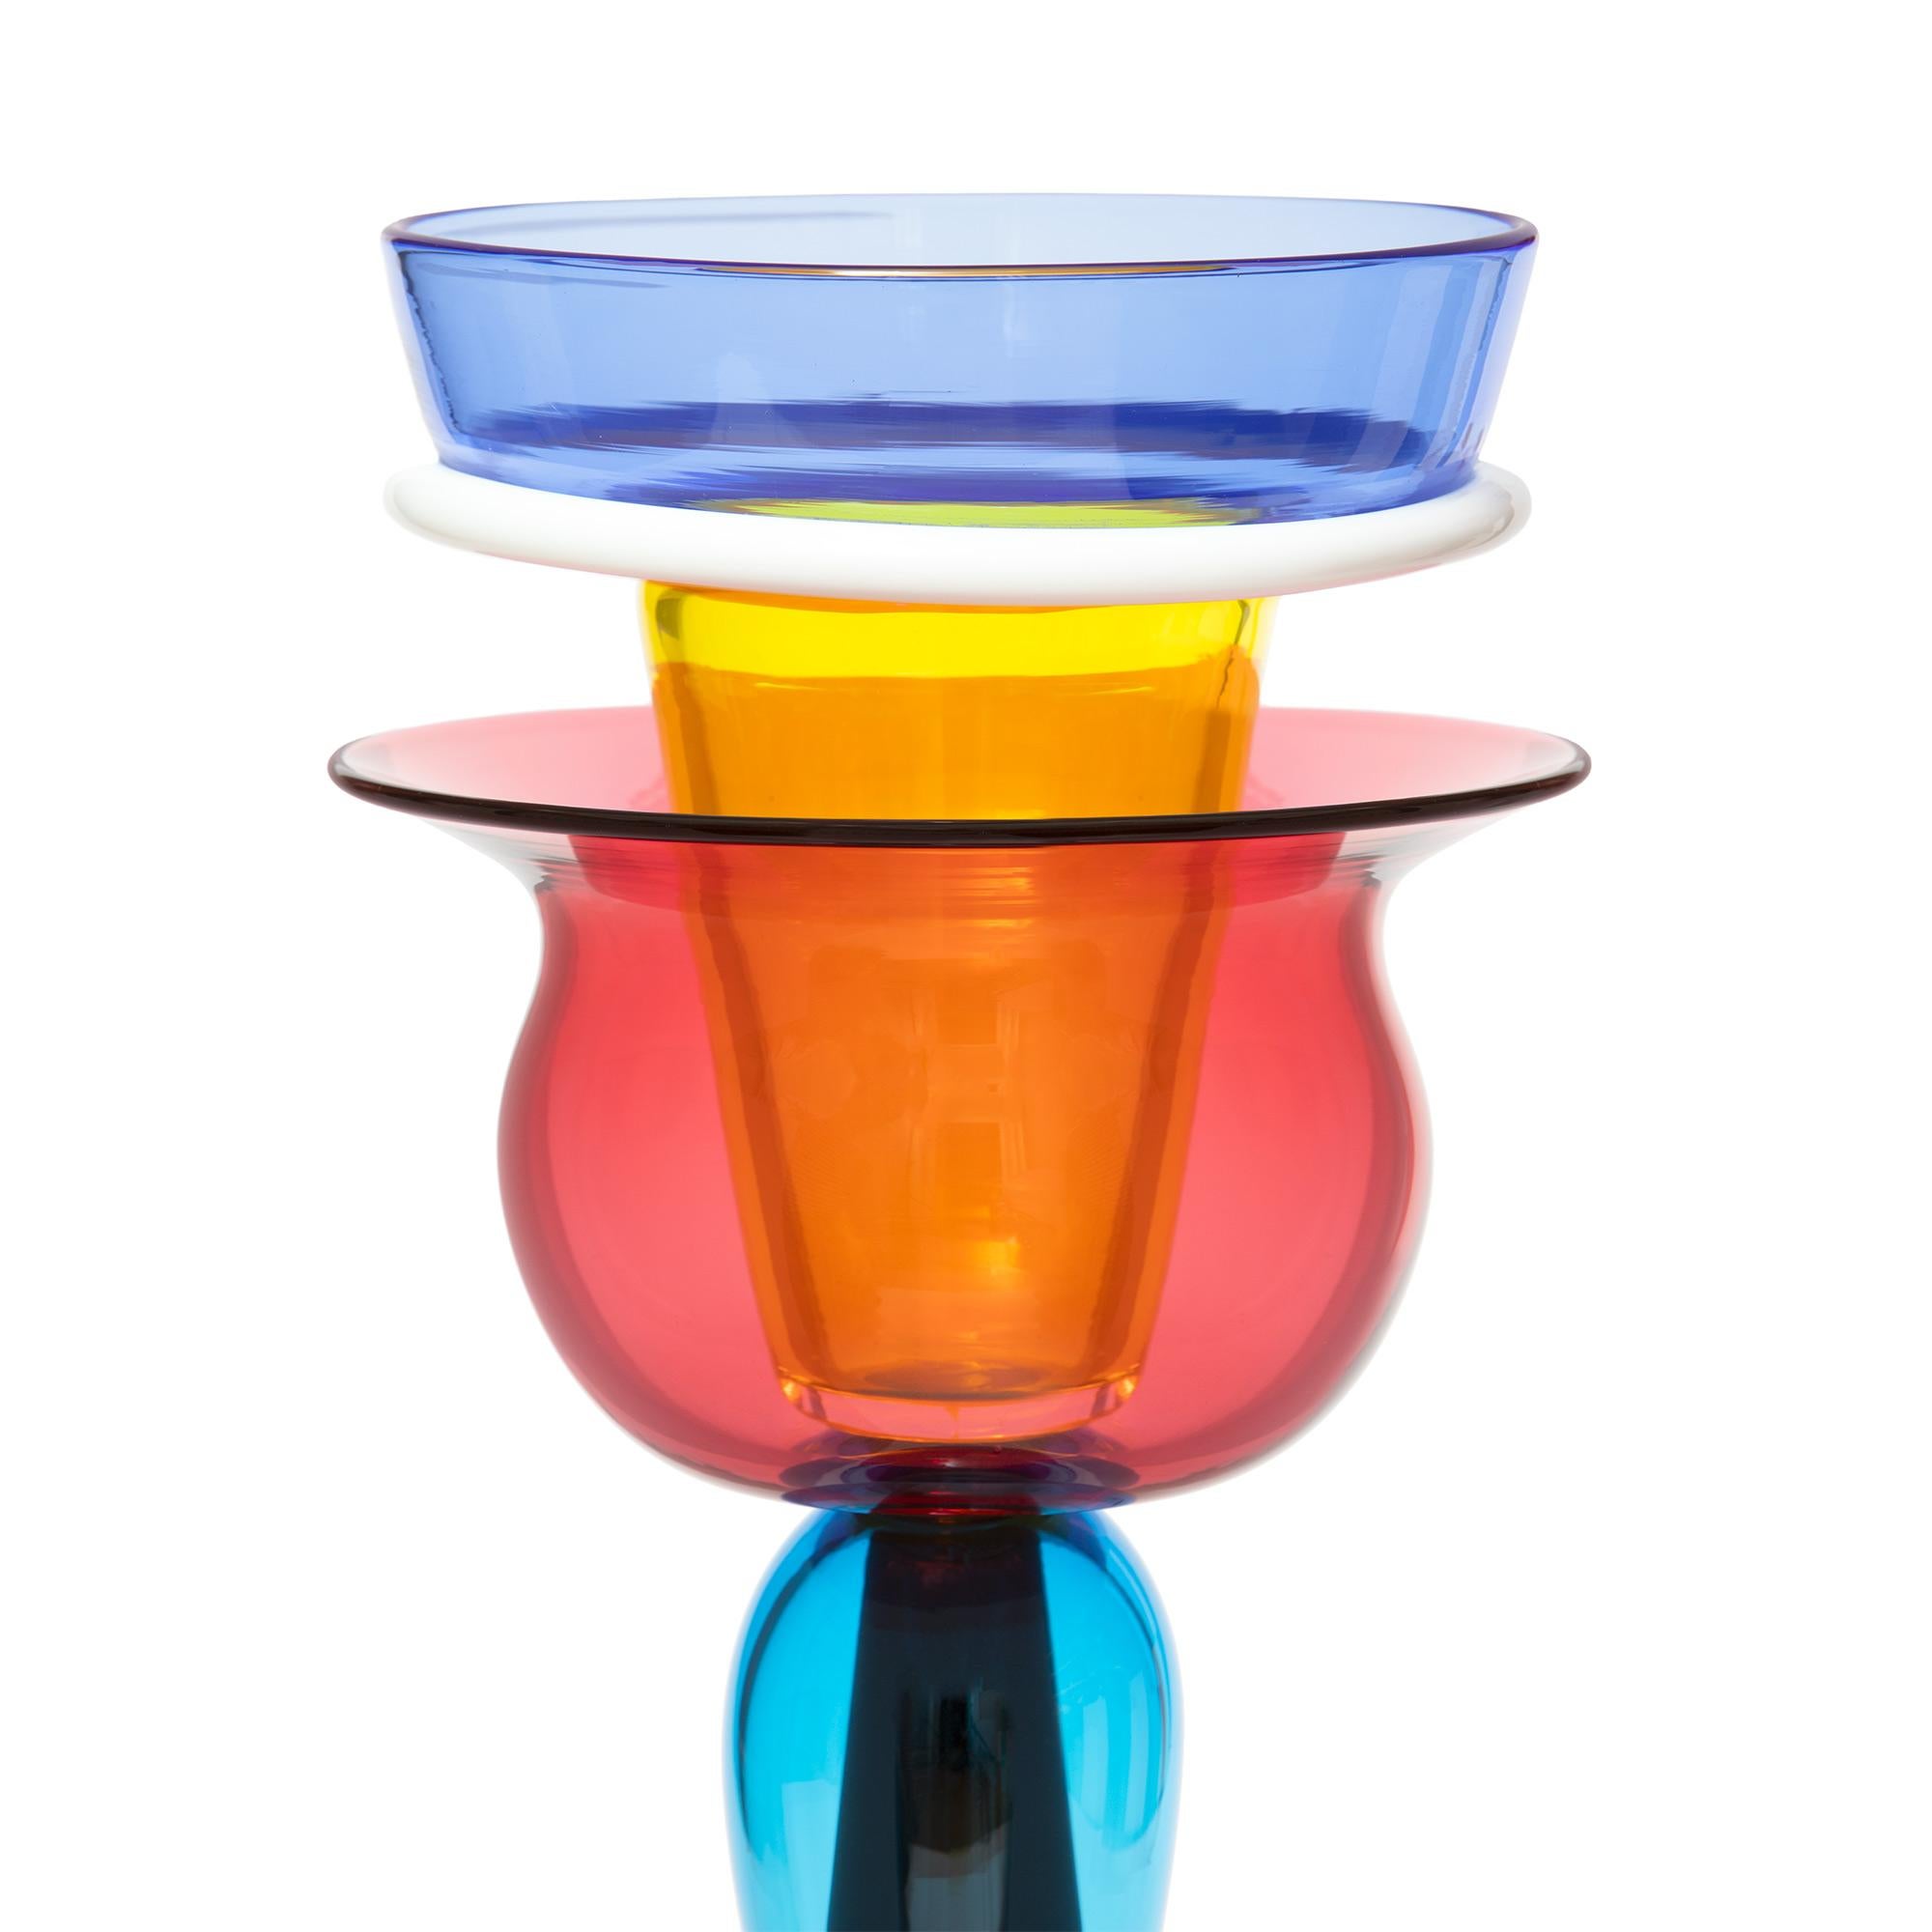 The Imera Glass Vase was originally designed by Ettore Sottsass in 1986. The vase is made out of blown glass, and signed on the base, for further information please see authenticity info below. 

Ettore Sottsass was born in Innsbruck in 1917. In